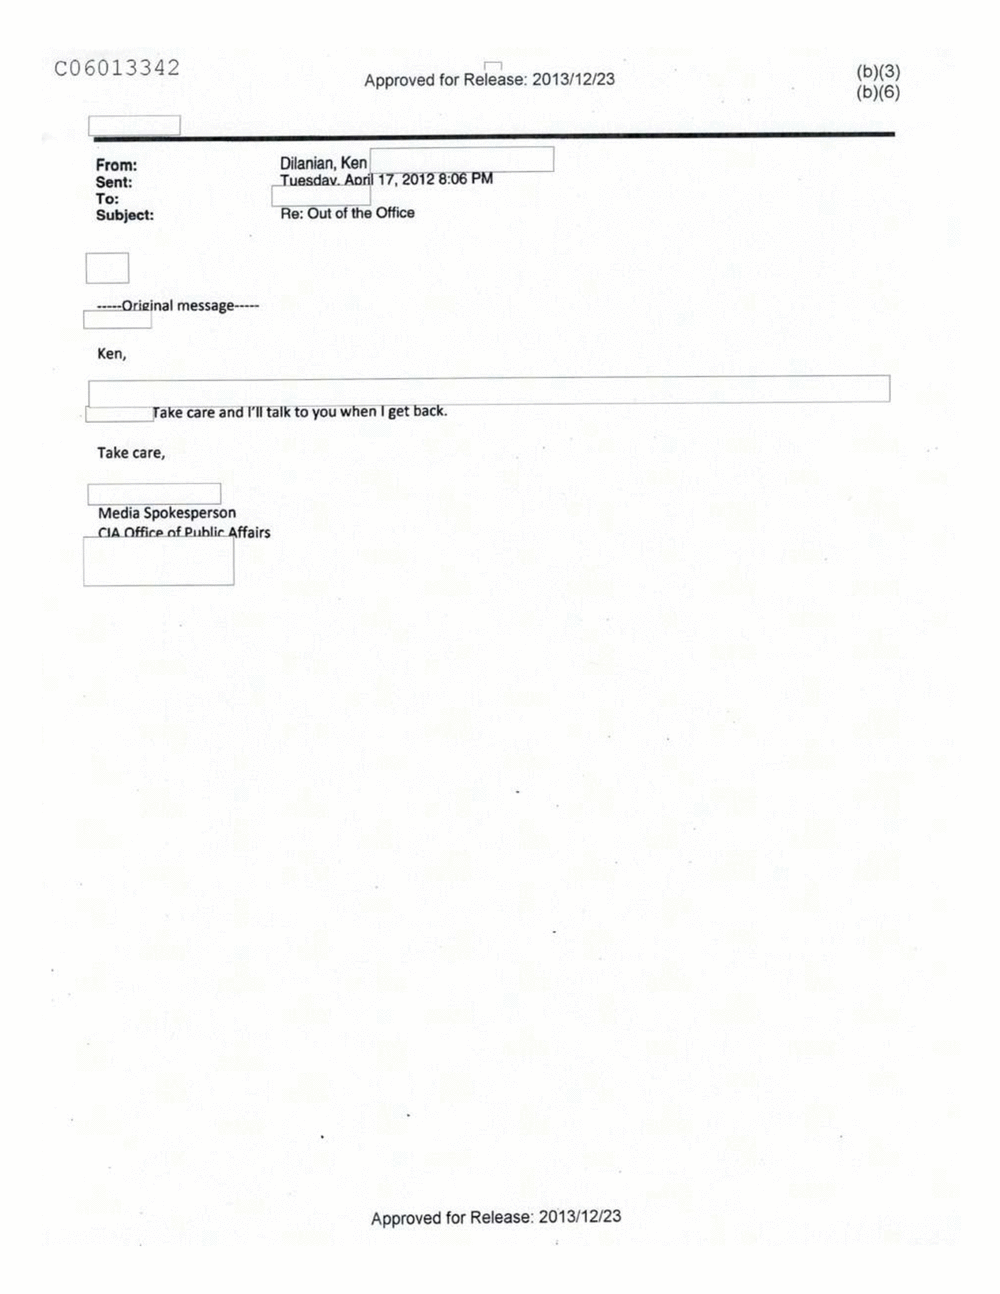 Page 250 from Email Correspondence Between Reporters and CIA Flacks